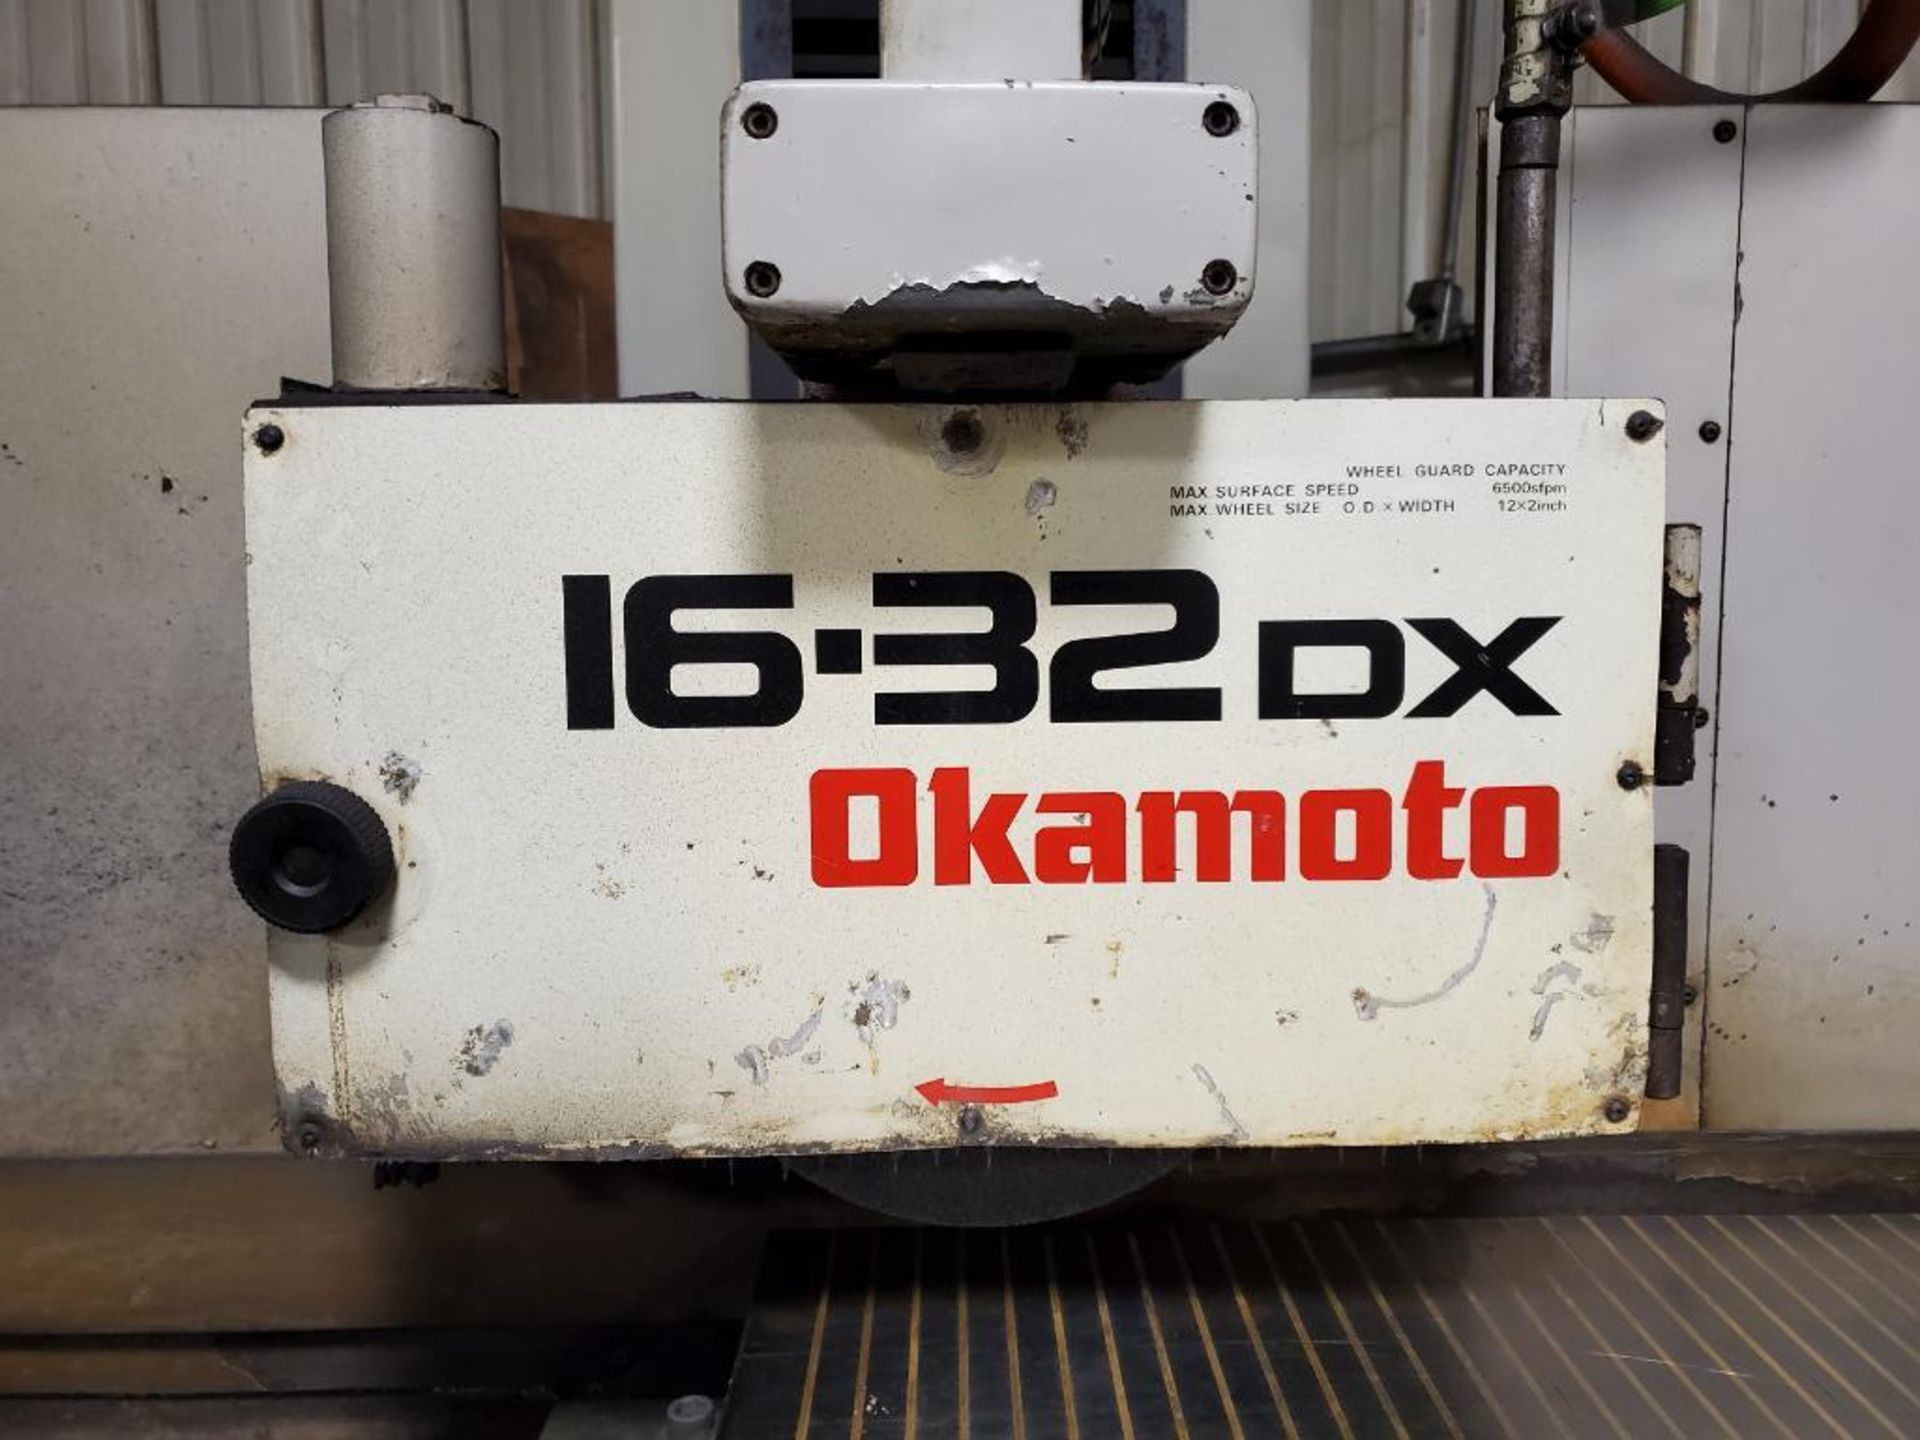 OKAMOTO 16-32DX AUTOMATIC HYDRAULIC SURFACE GRINDER, ACC SERIES, 2-AXIS CONTROL PANEL, 12'' X 2'' WH - Image 7 of 12